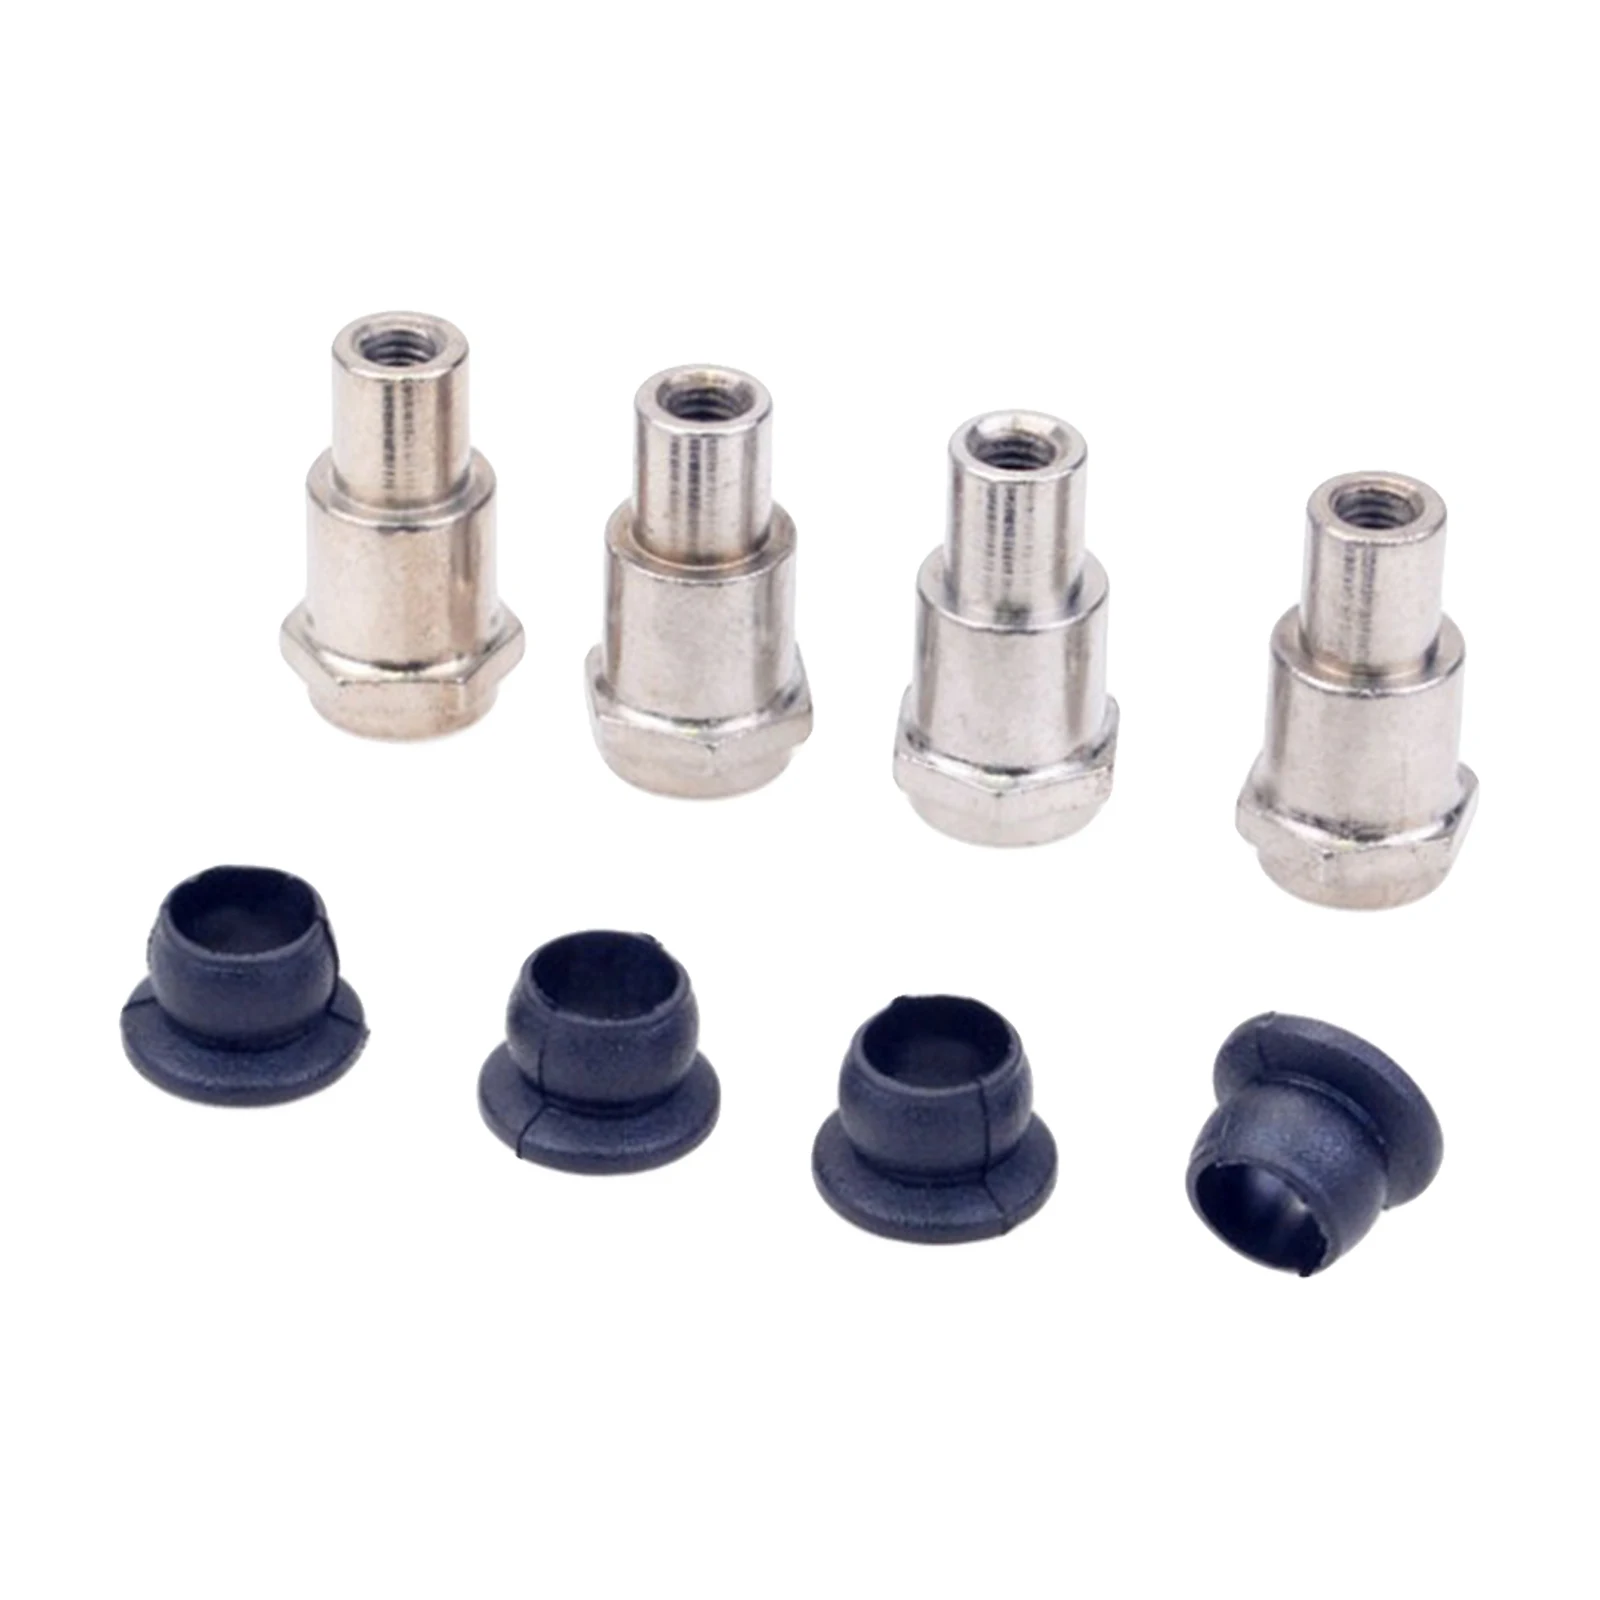 4 Pieces Metal Shock Absorber Bushing 1:8 Parts for Zd /8 RC Car